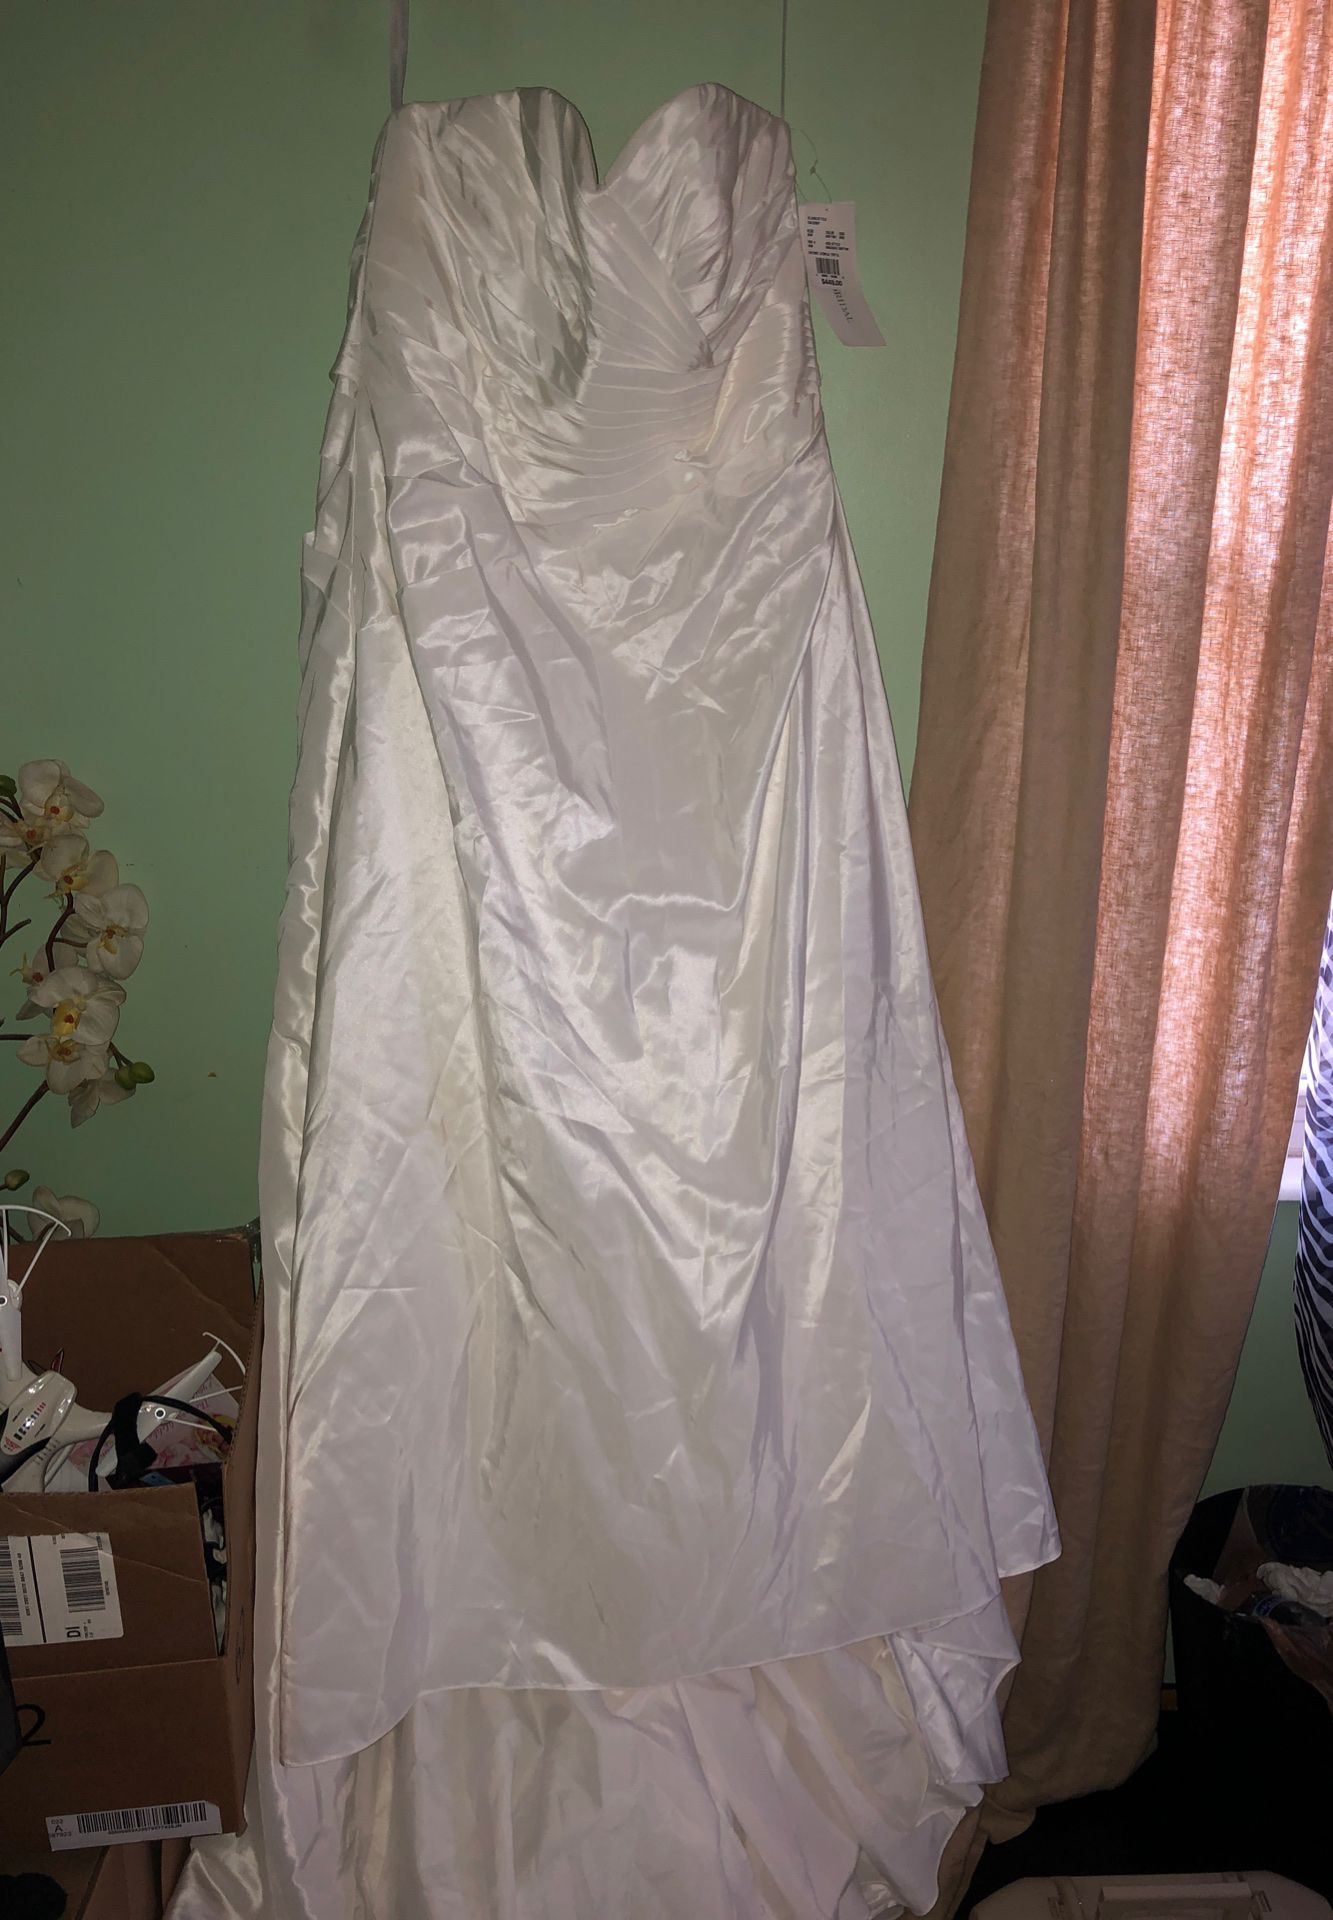 BRAND NEW David’s Bridal Wedding Dress w/ All accessories included!